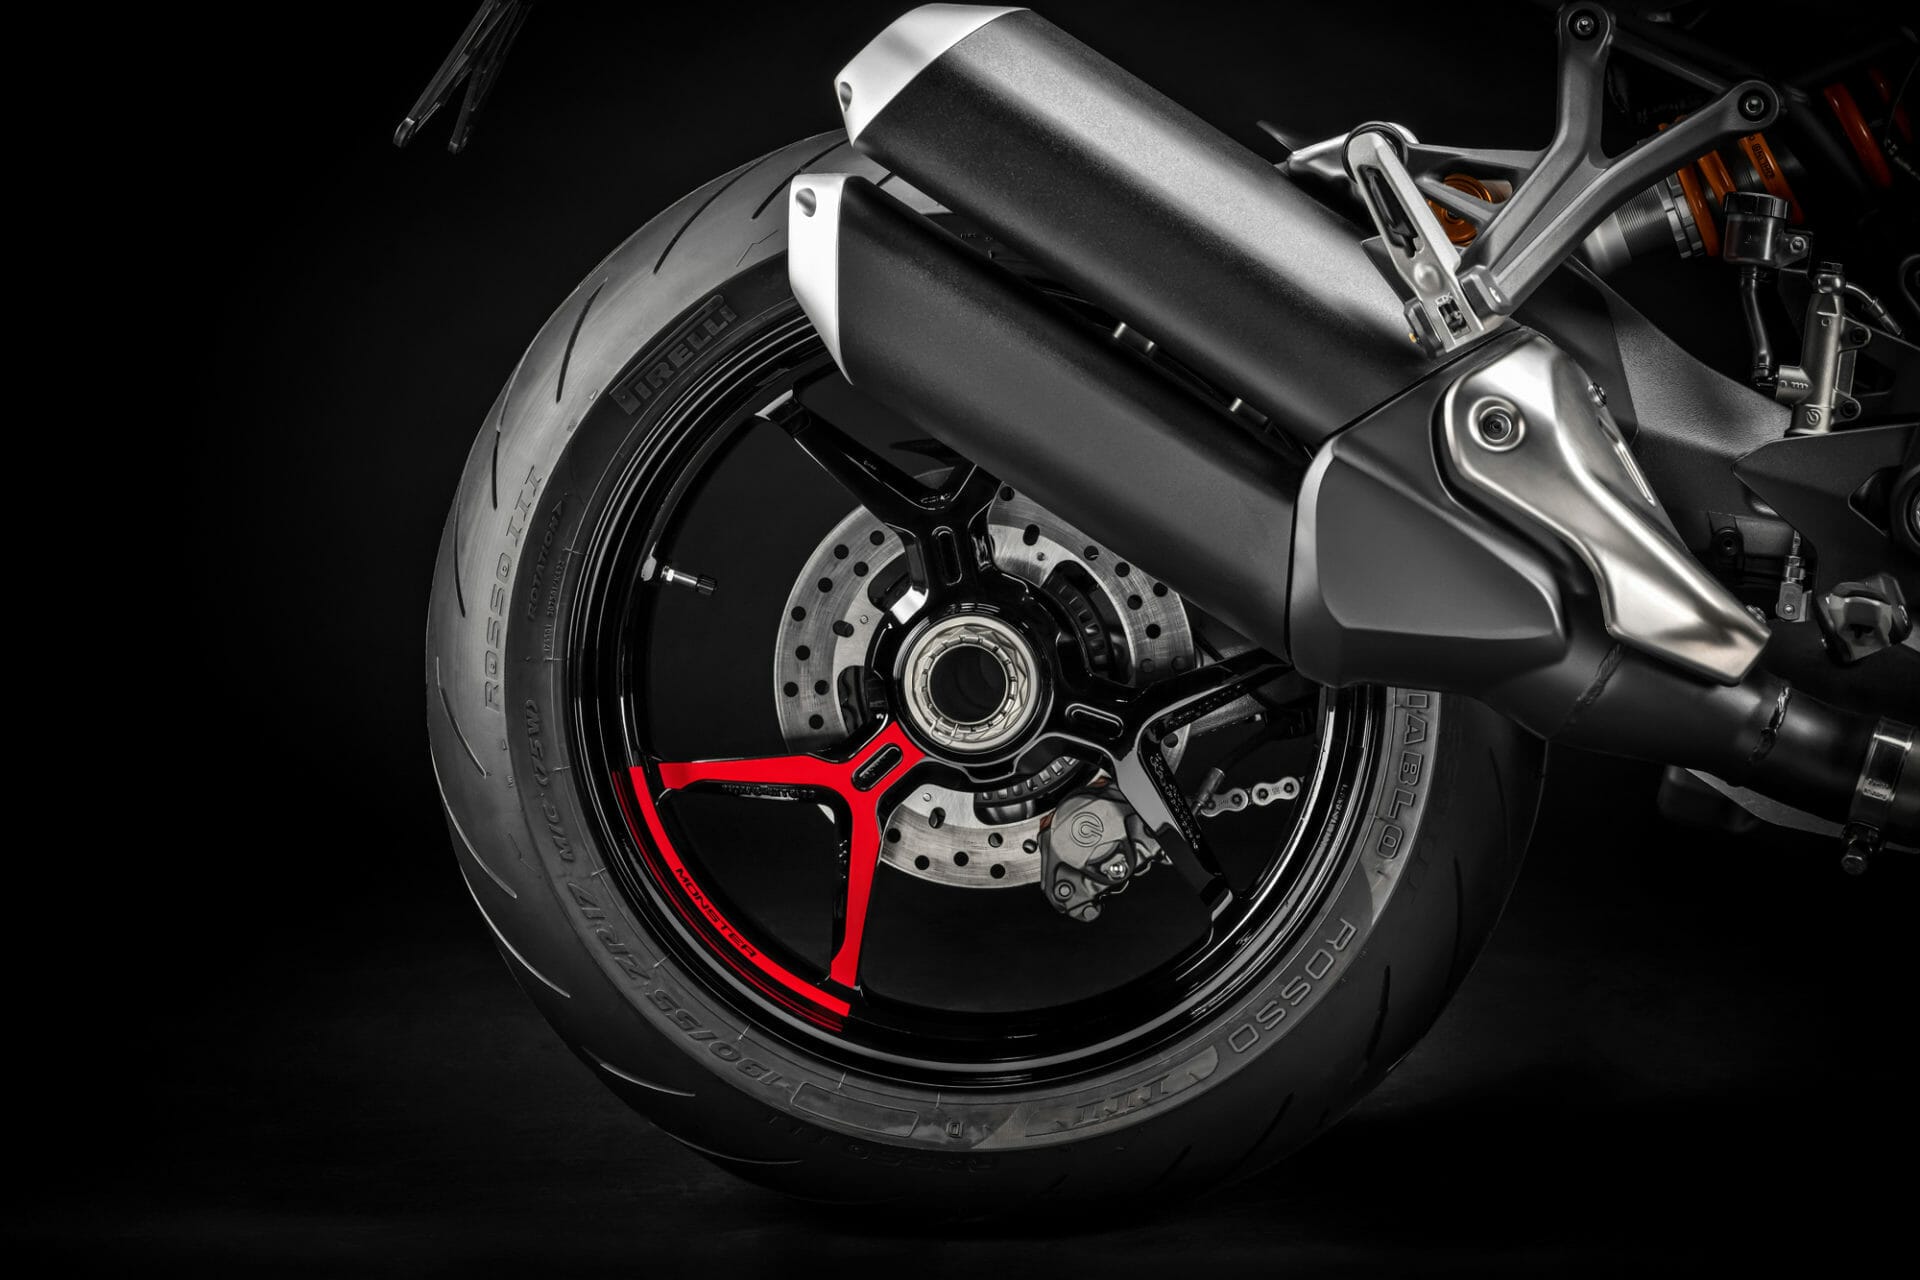 Ducati Multistrada V4 with single-sided swing arm? - Motorcycles